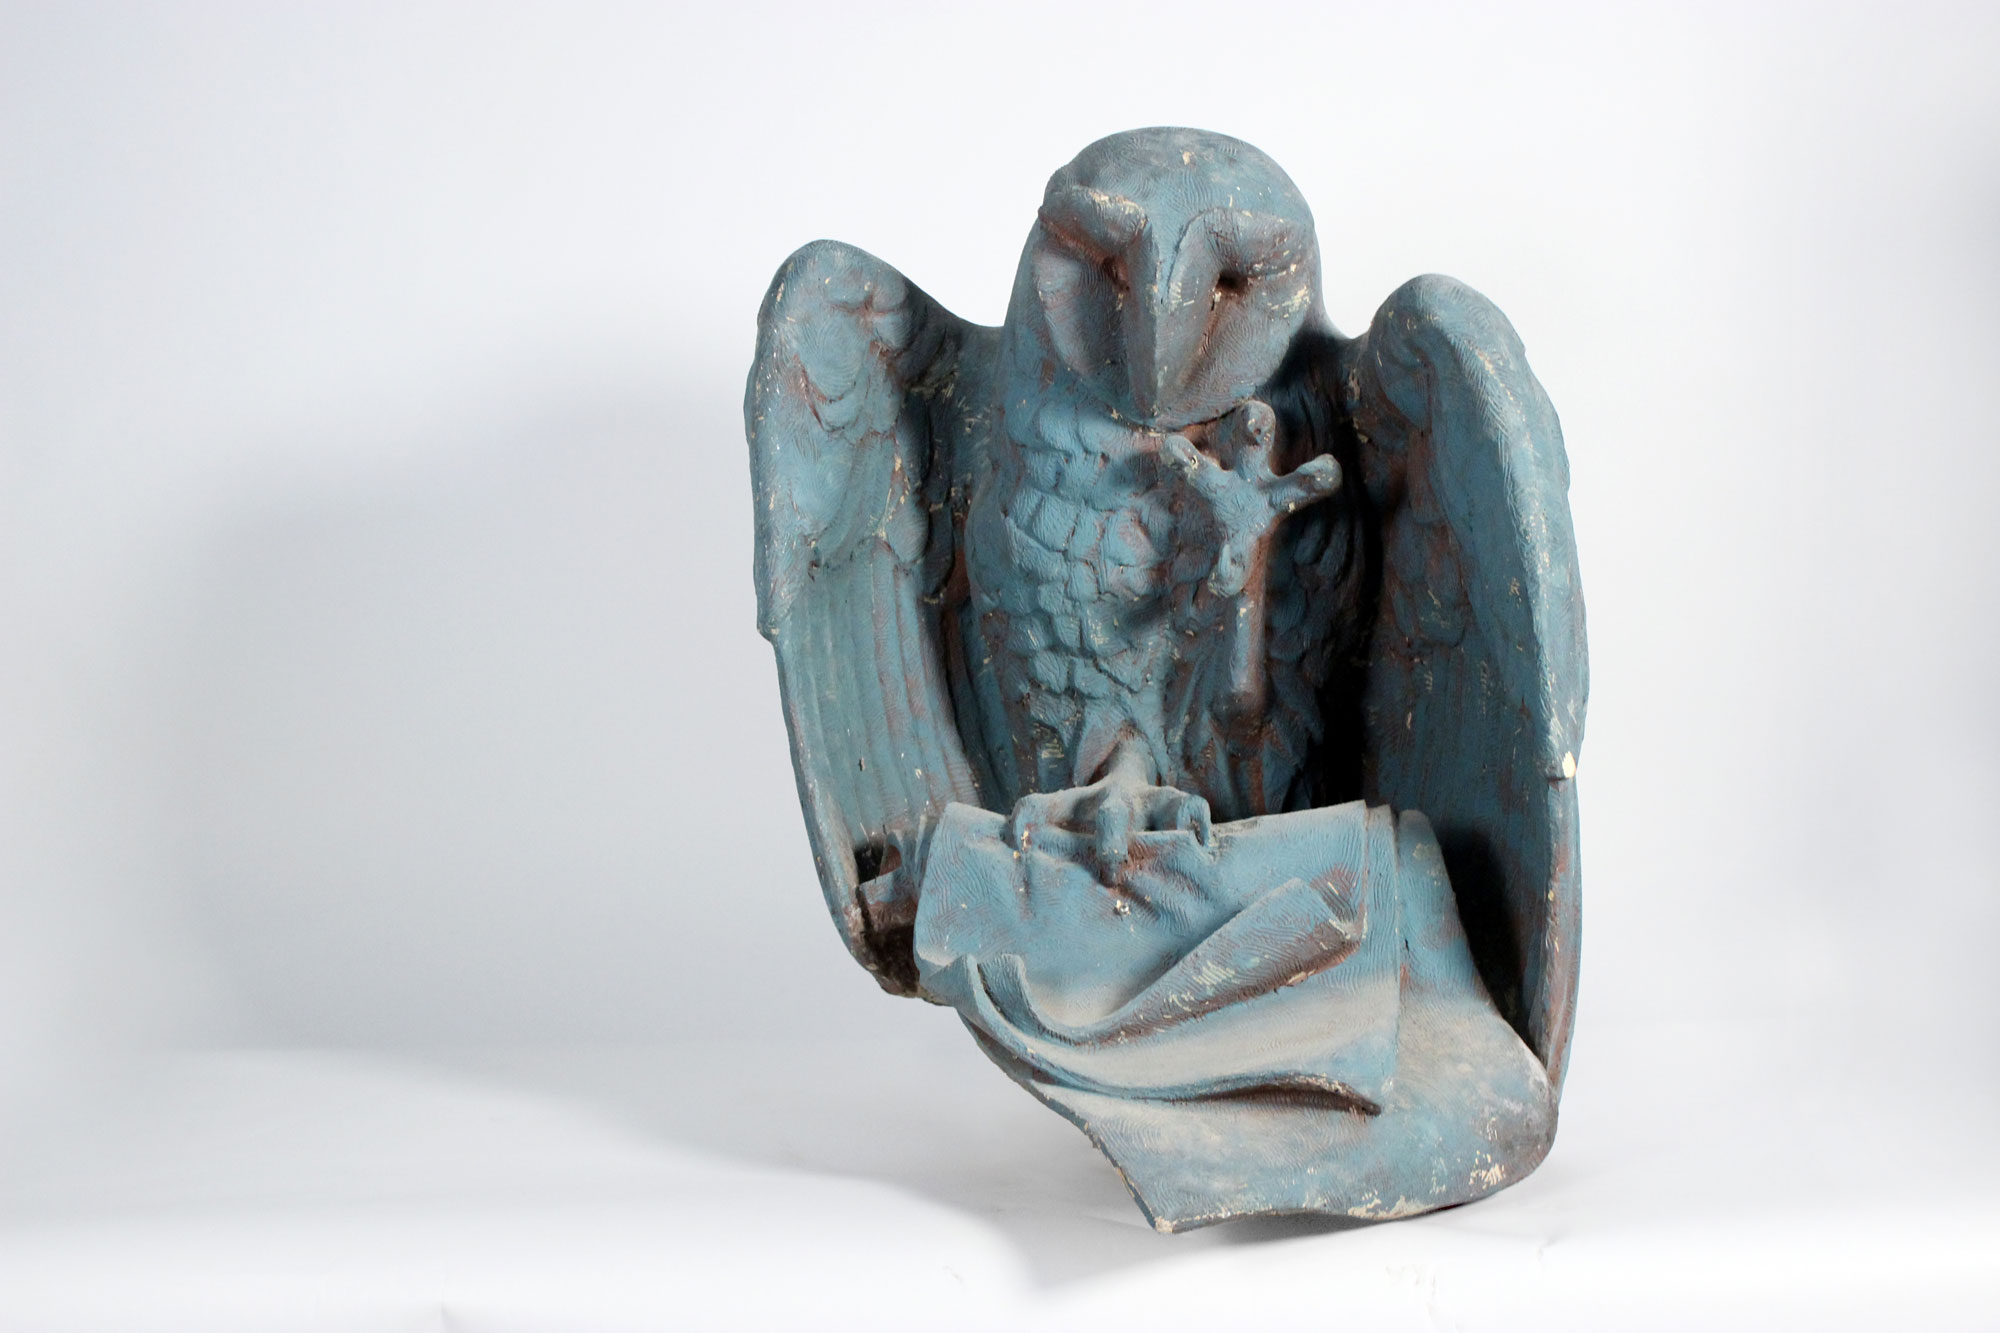 Owl maquette for the Chicago Public Library by Raymond Kaskey.